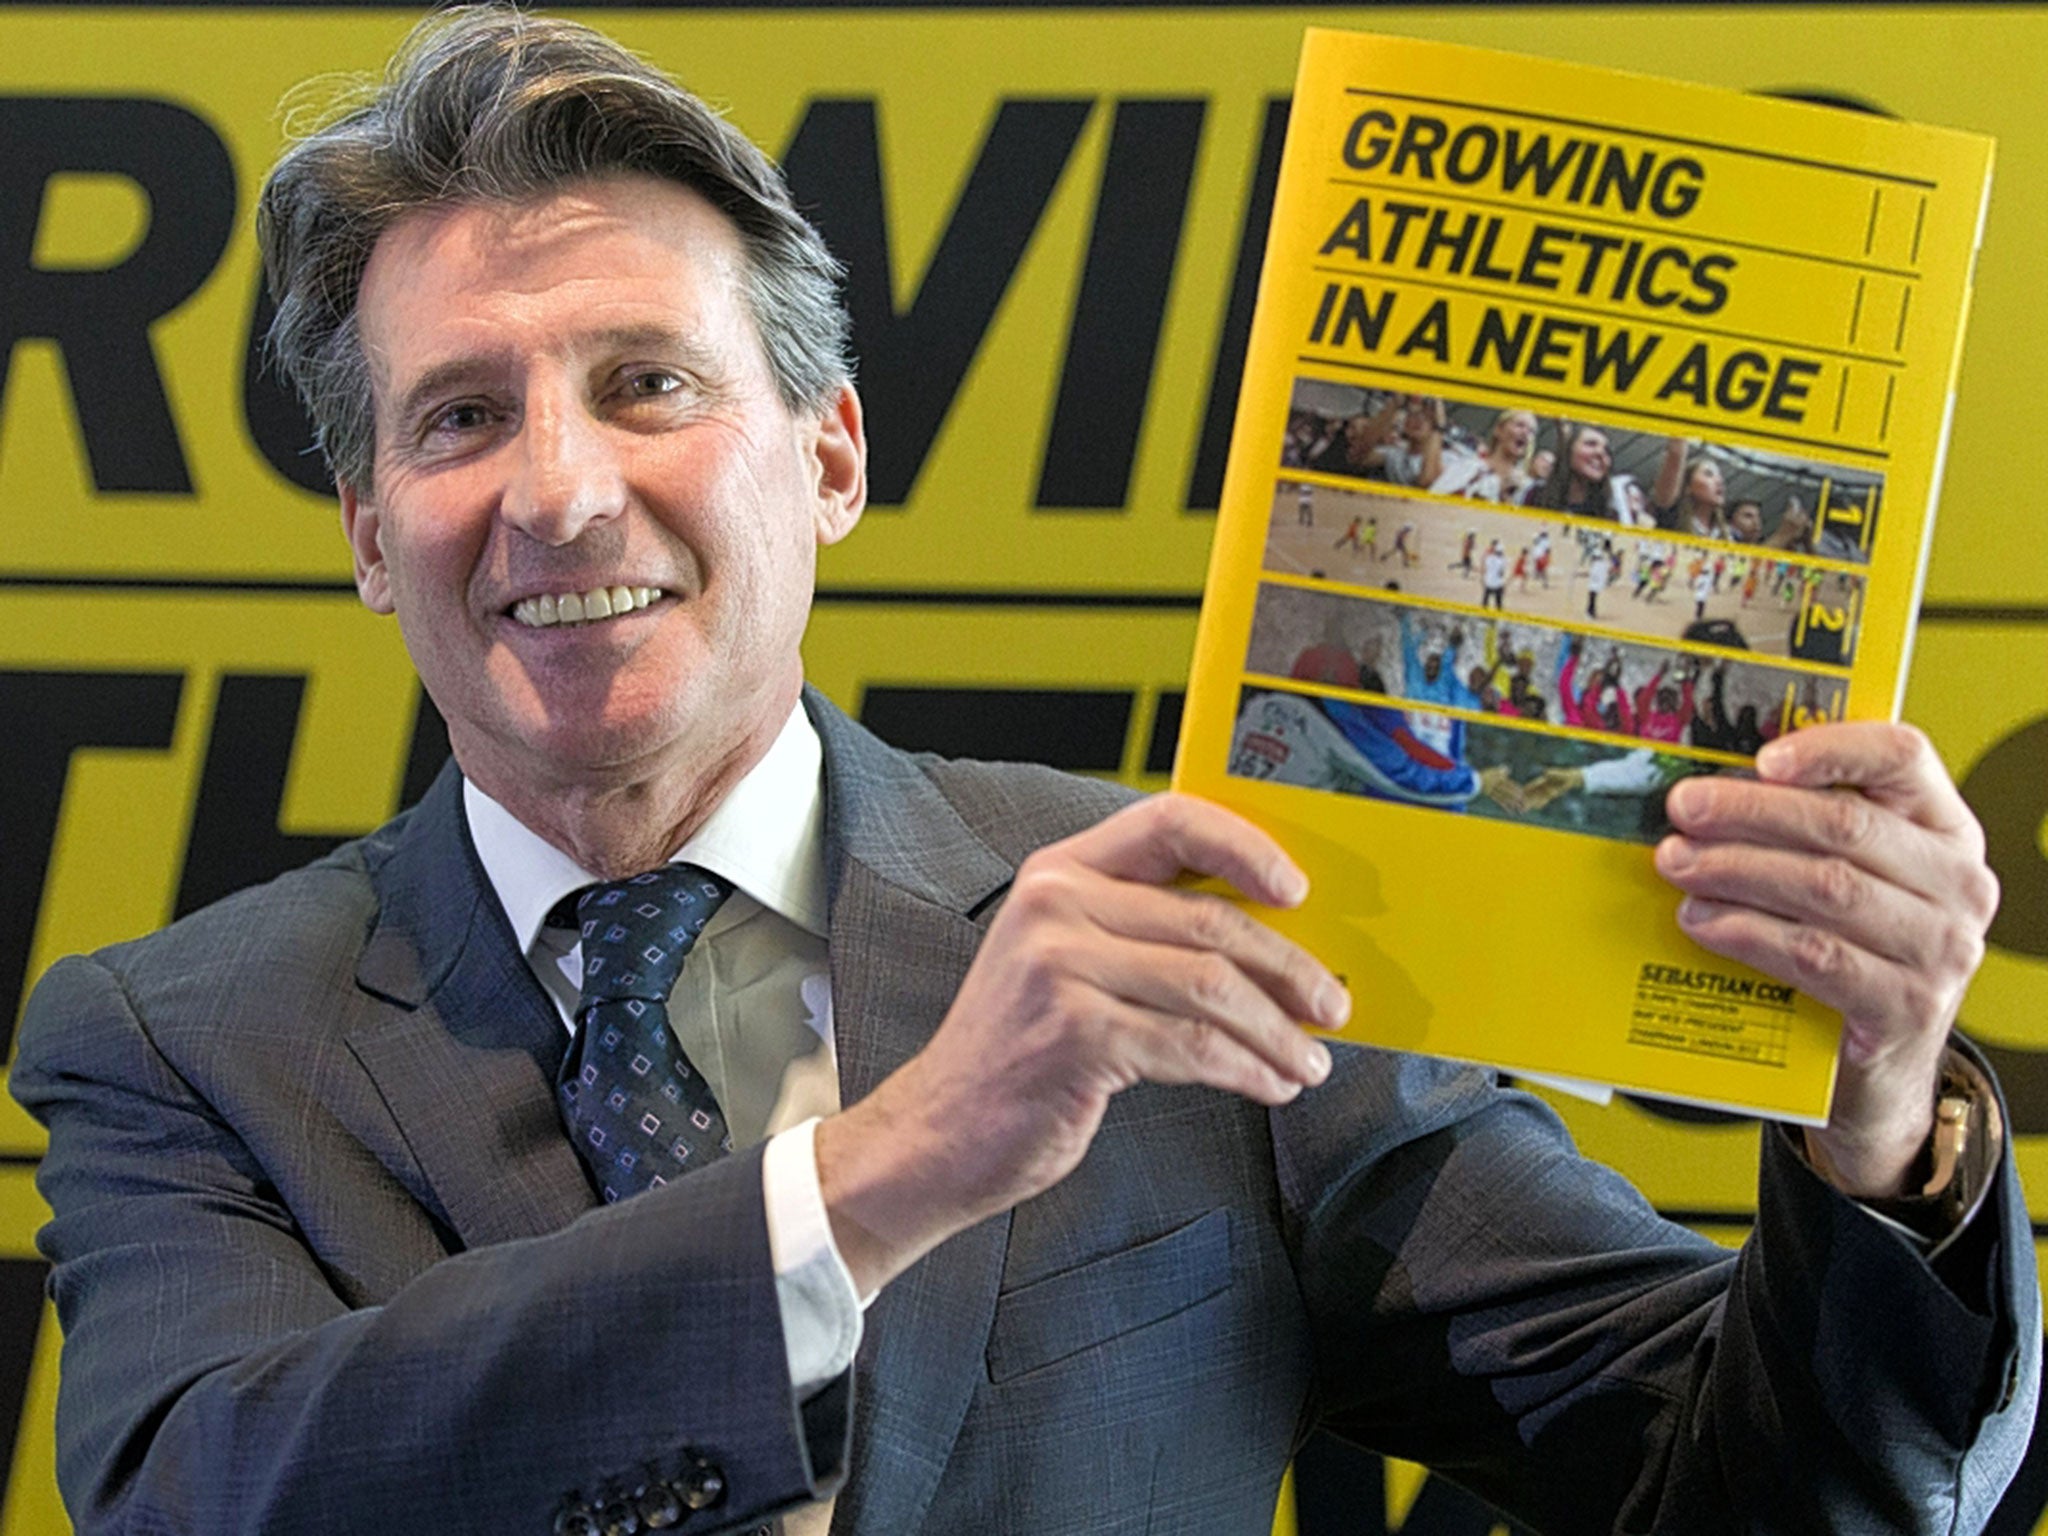 Sebastian Coe at the launch of his election manifesto for the presidency of the IAAF